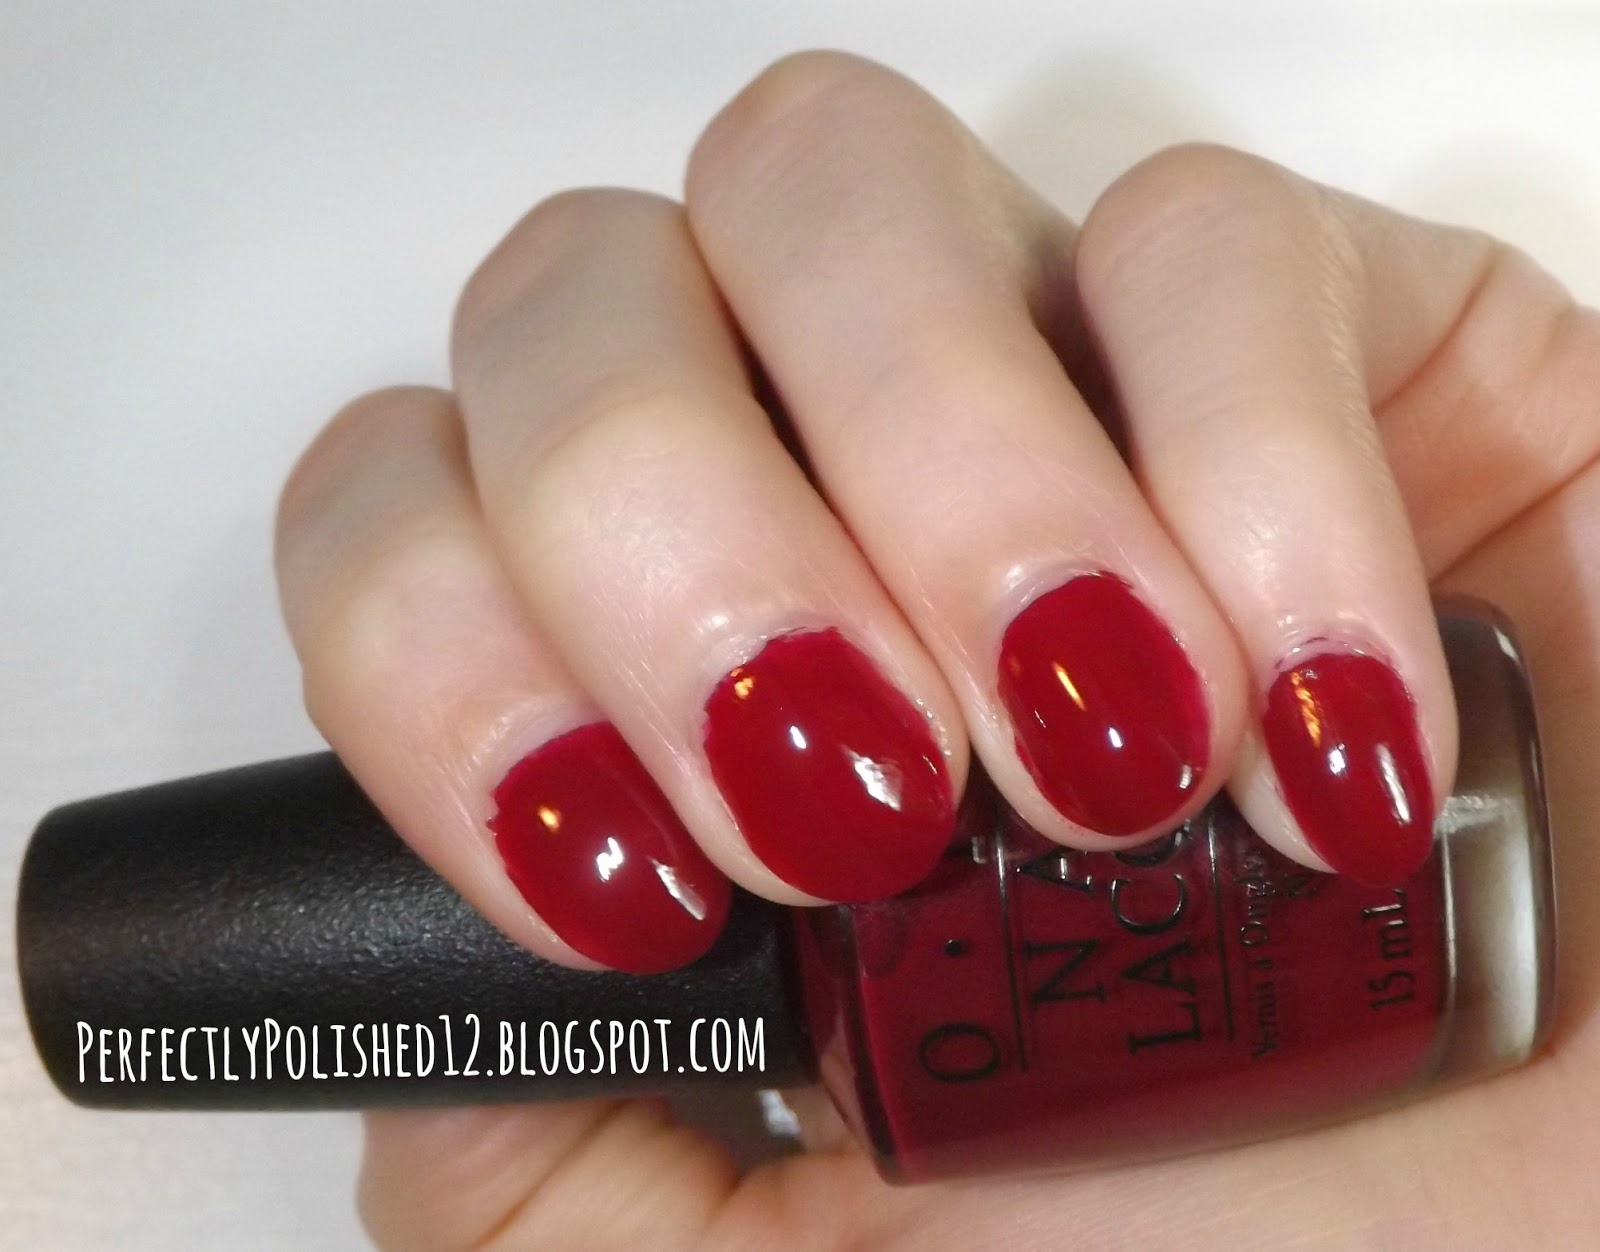 3. OPI Nail Lacquer in "Malaga Wine" - wide 7